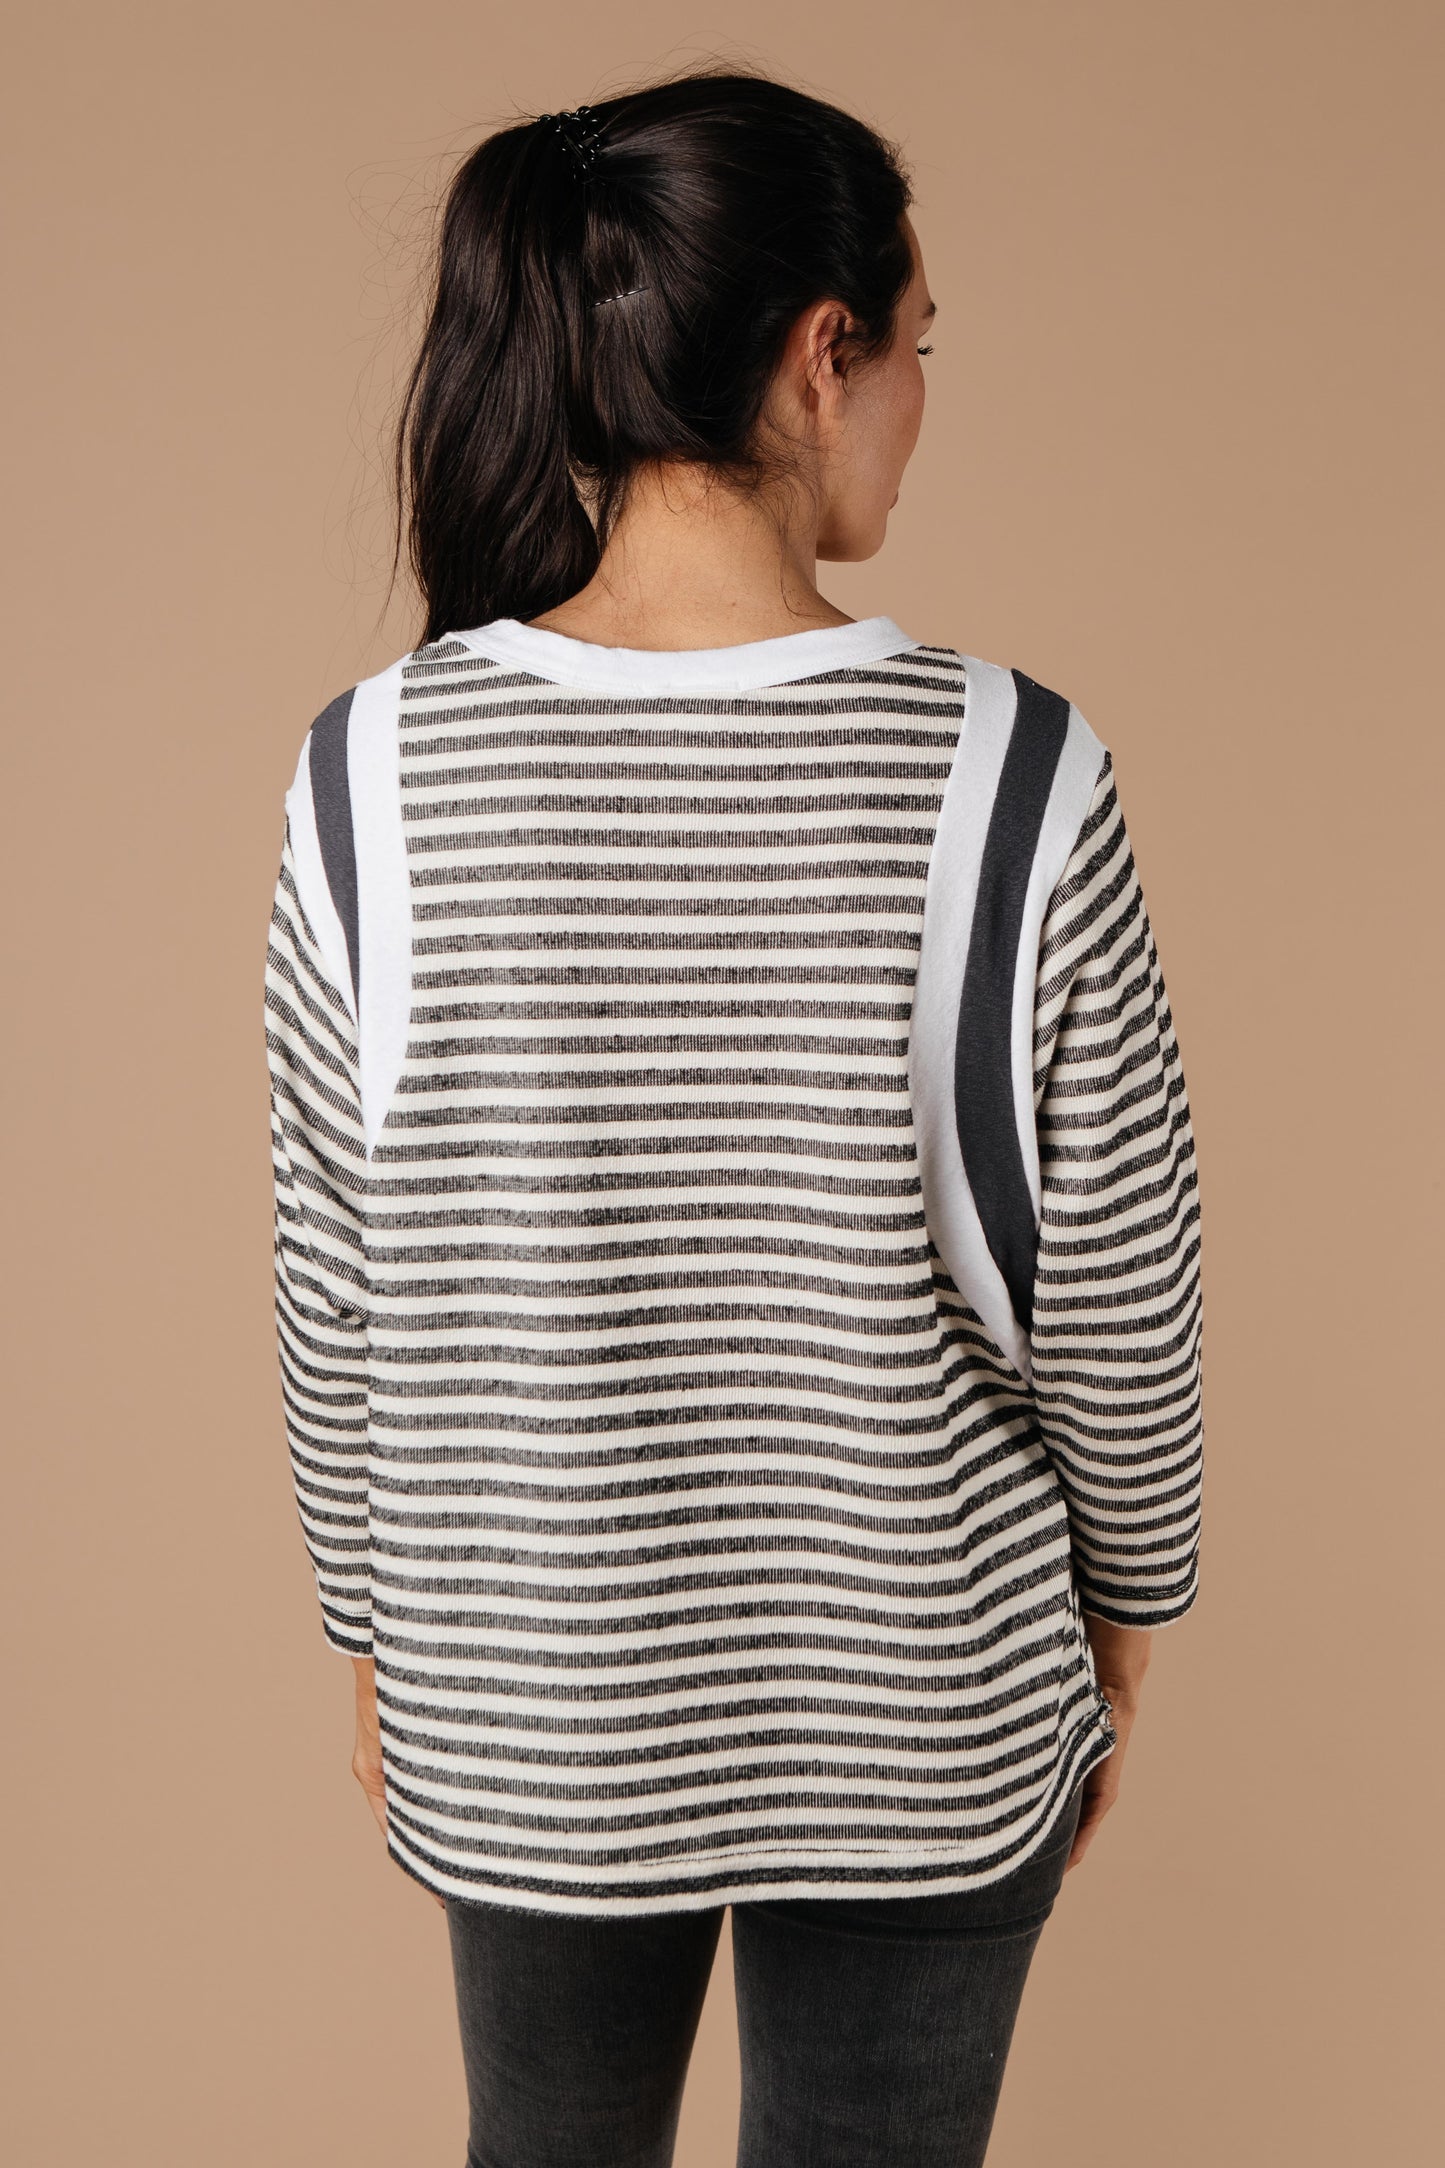 Double Trouble Striped Top